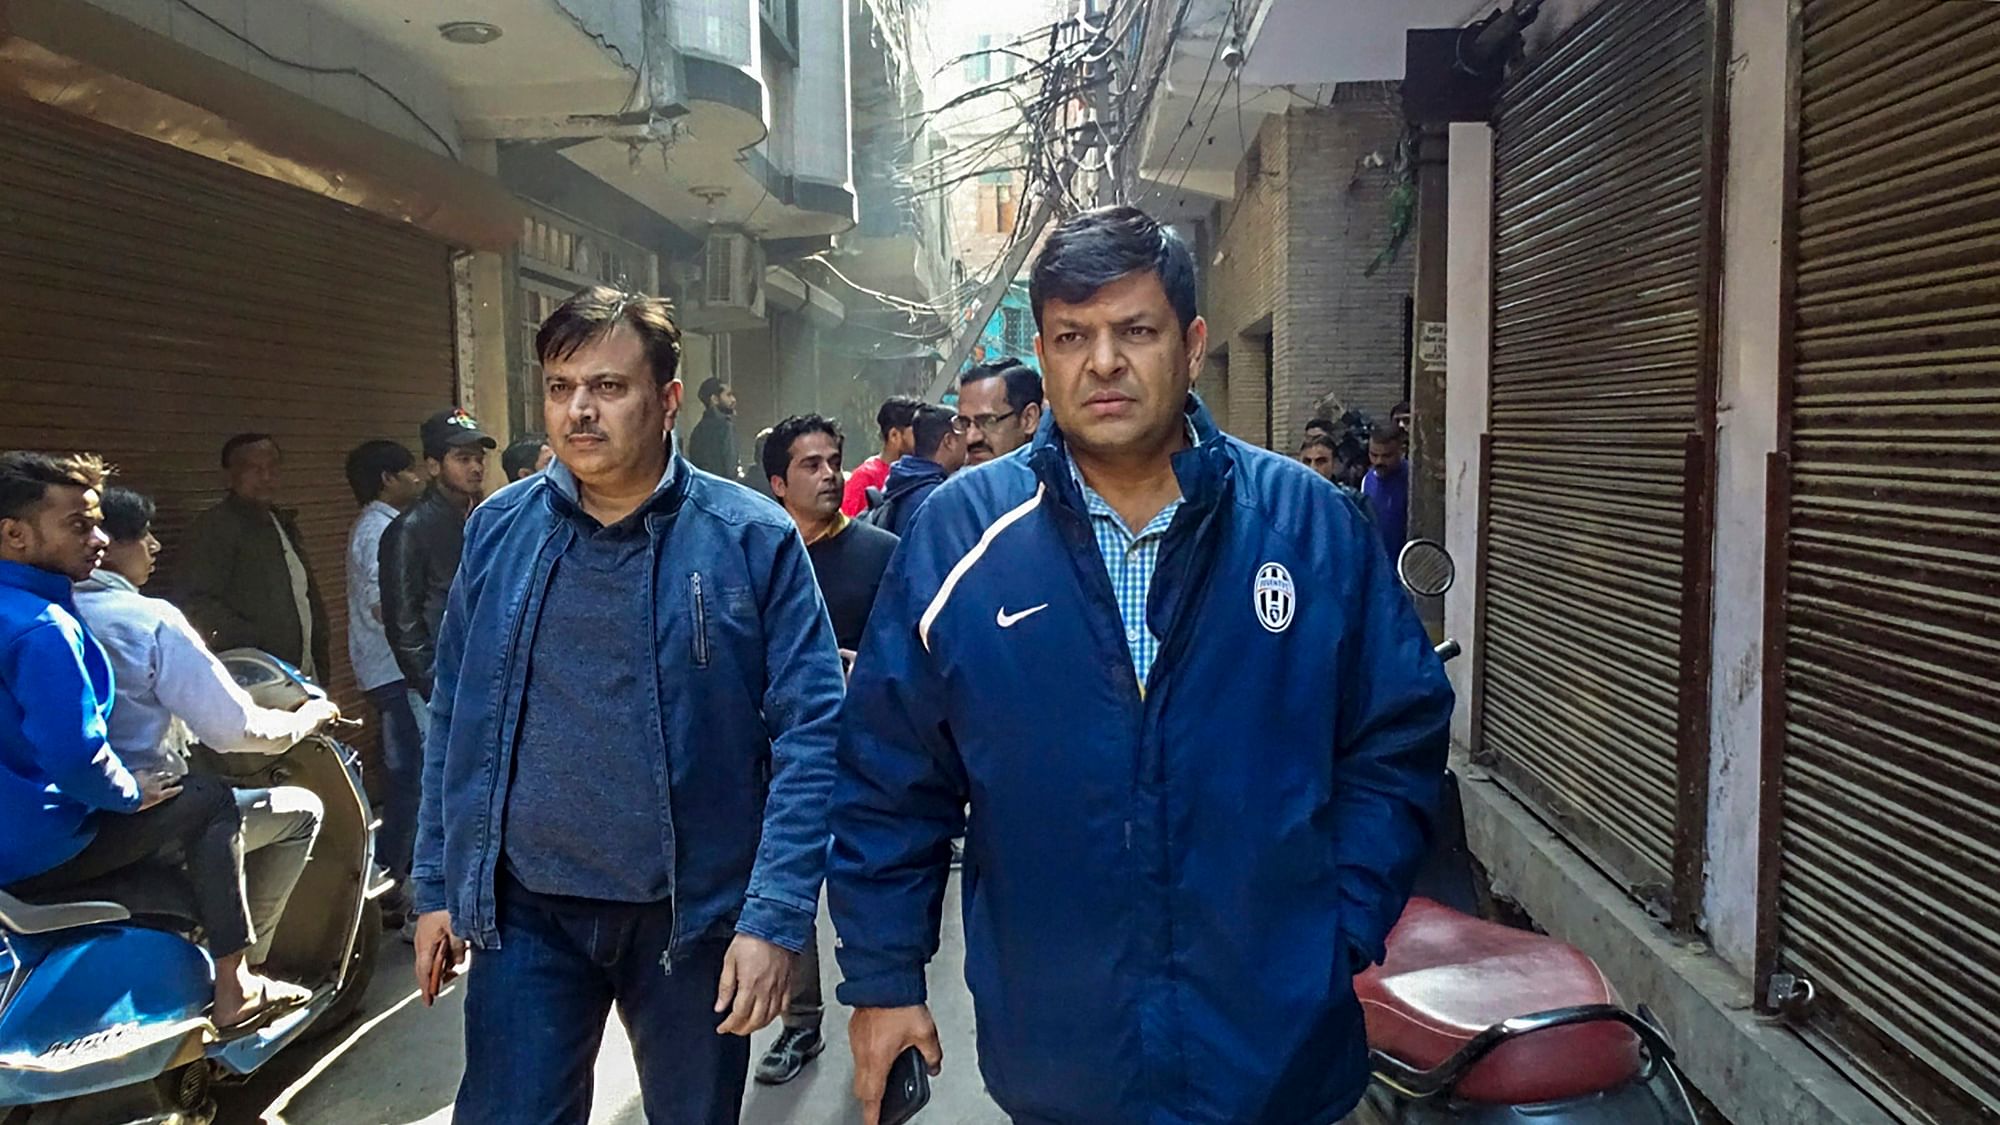 National Investigation Agency (NIA) and Delhi Police officials during a search operation in connection with a probe into a new ISIS module called Harkat ul Harb e Islam, at Jaffrabad, North East district in Delhi.